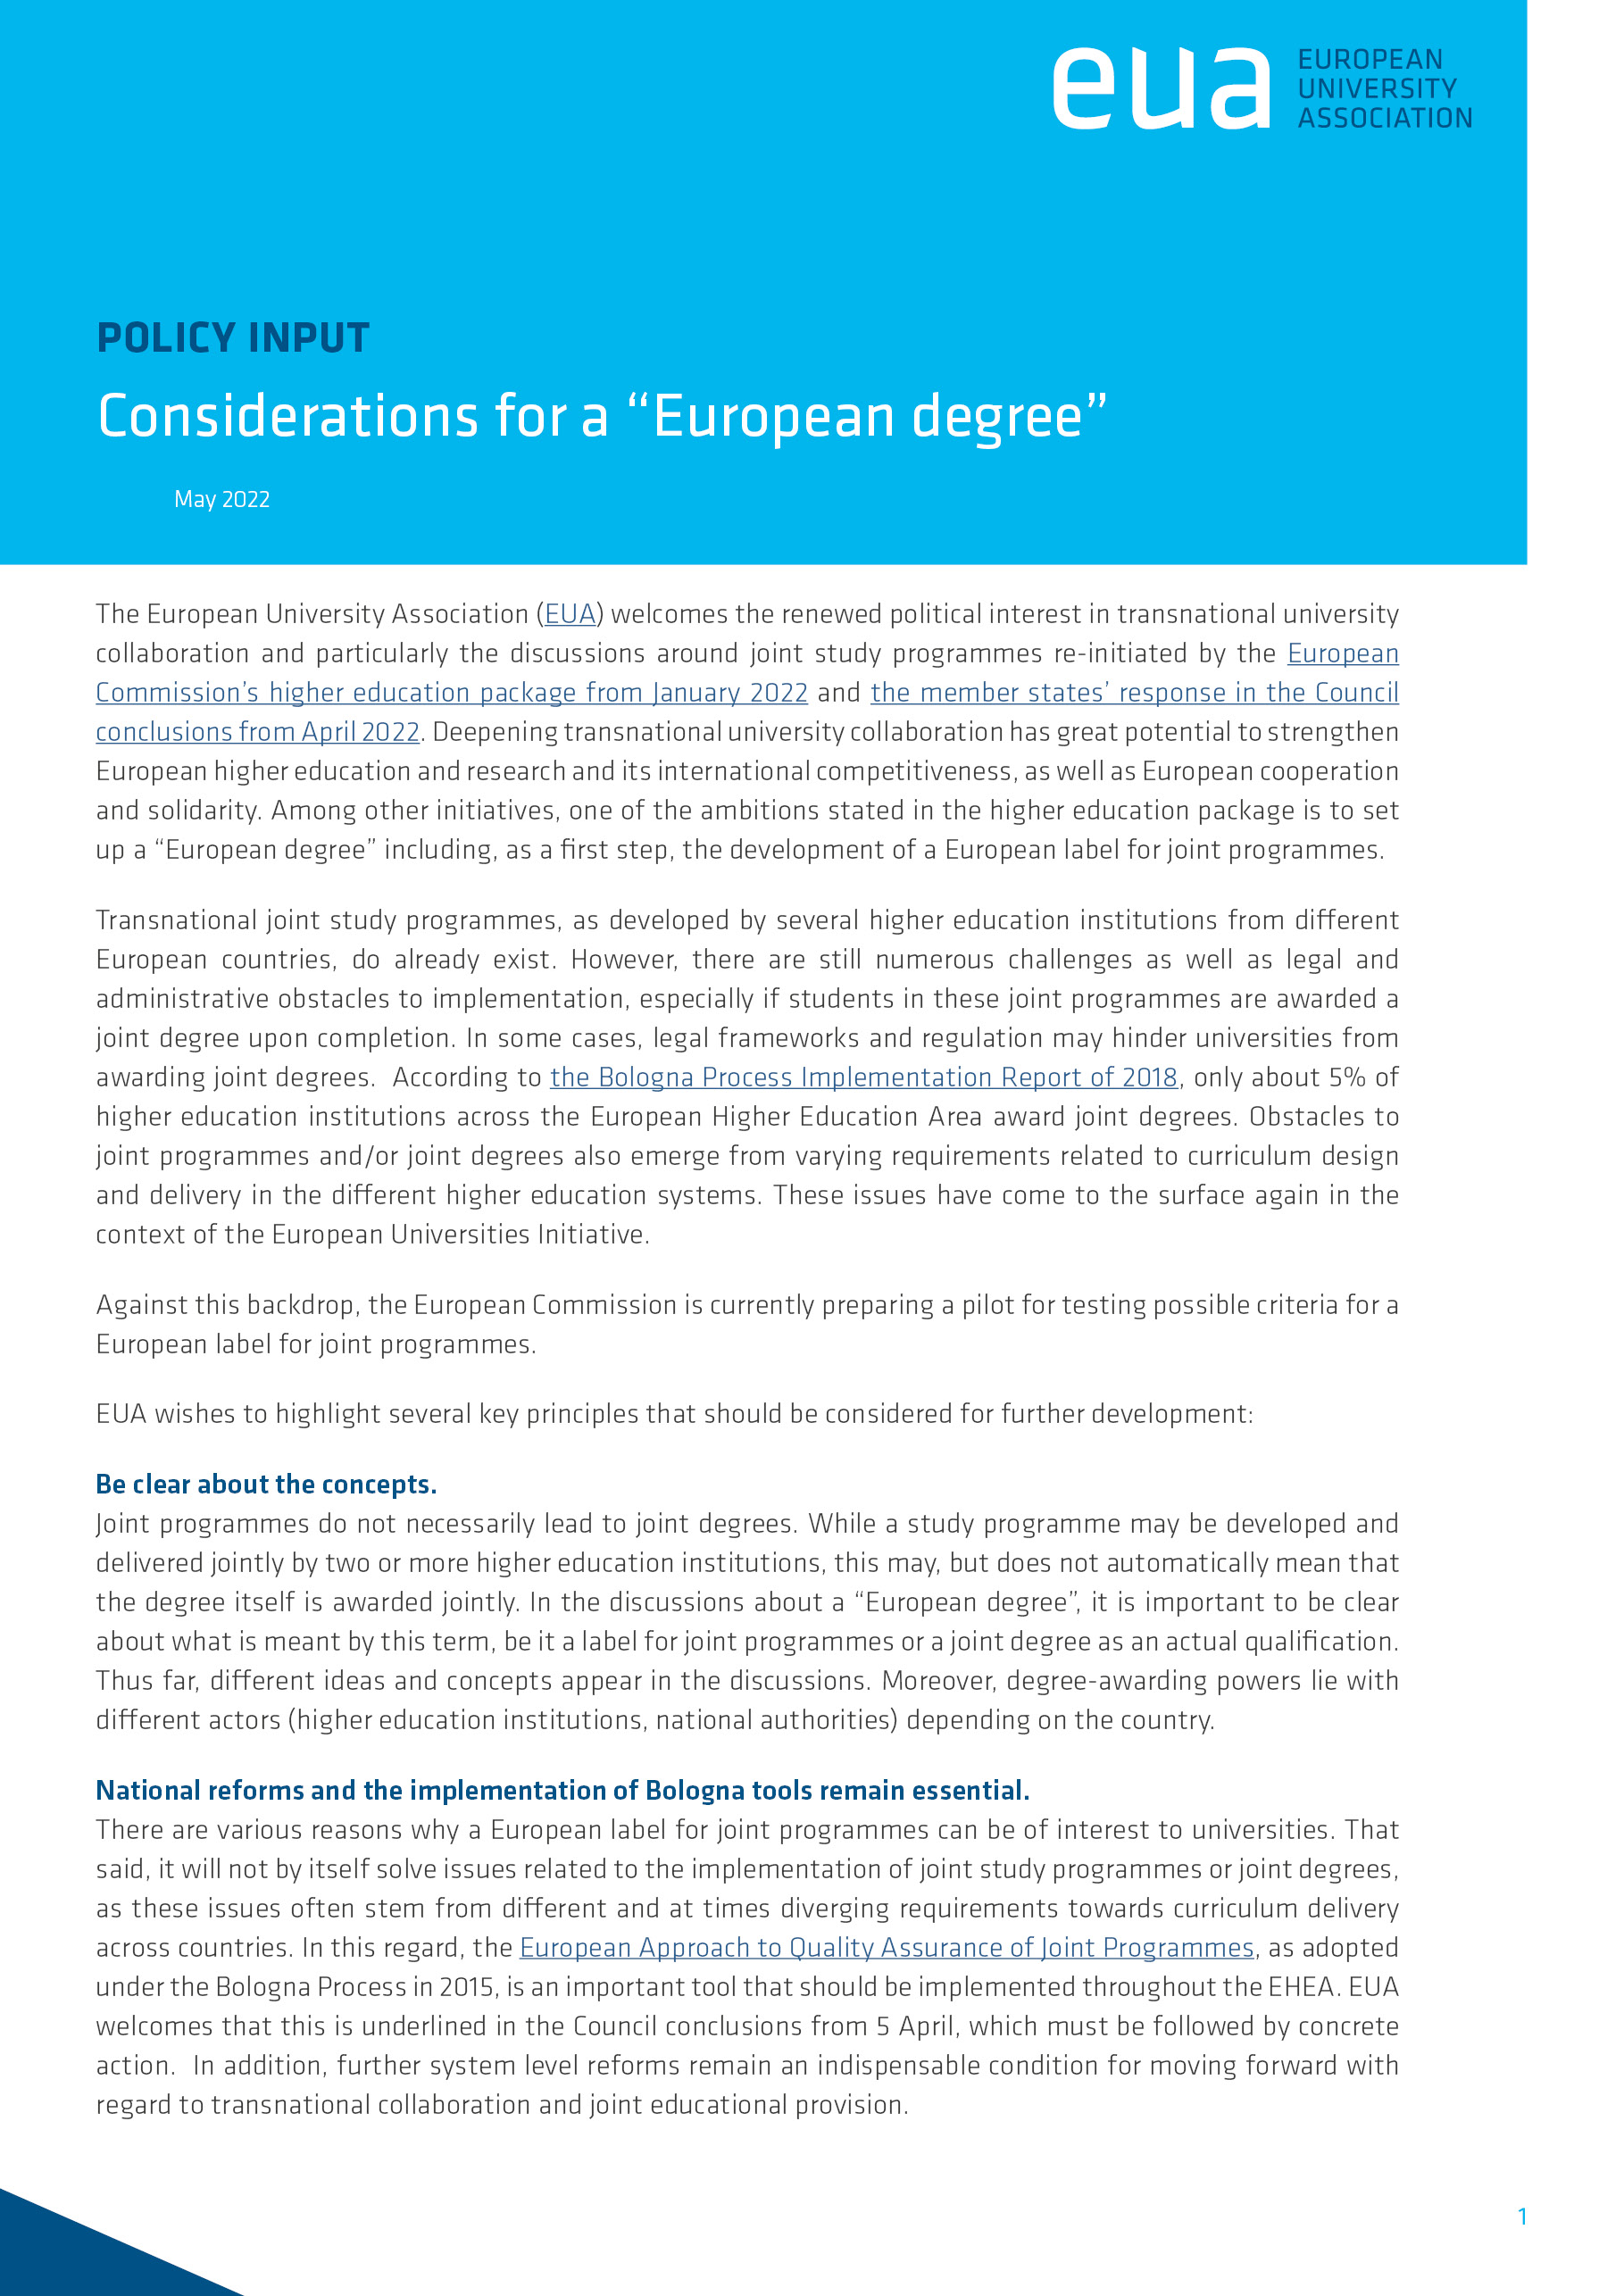 Considerations for a “European degree”